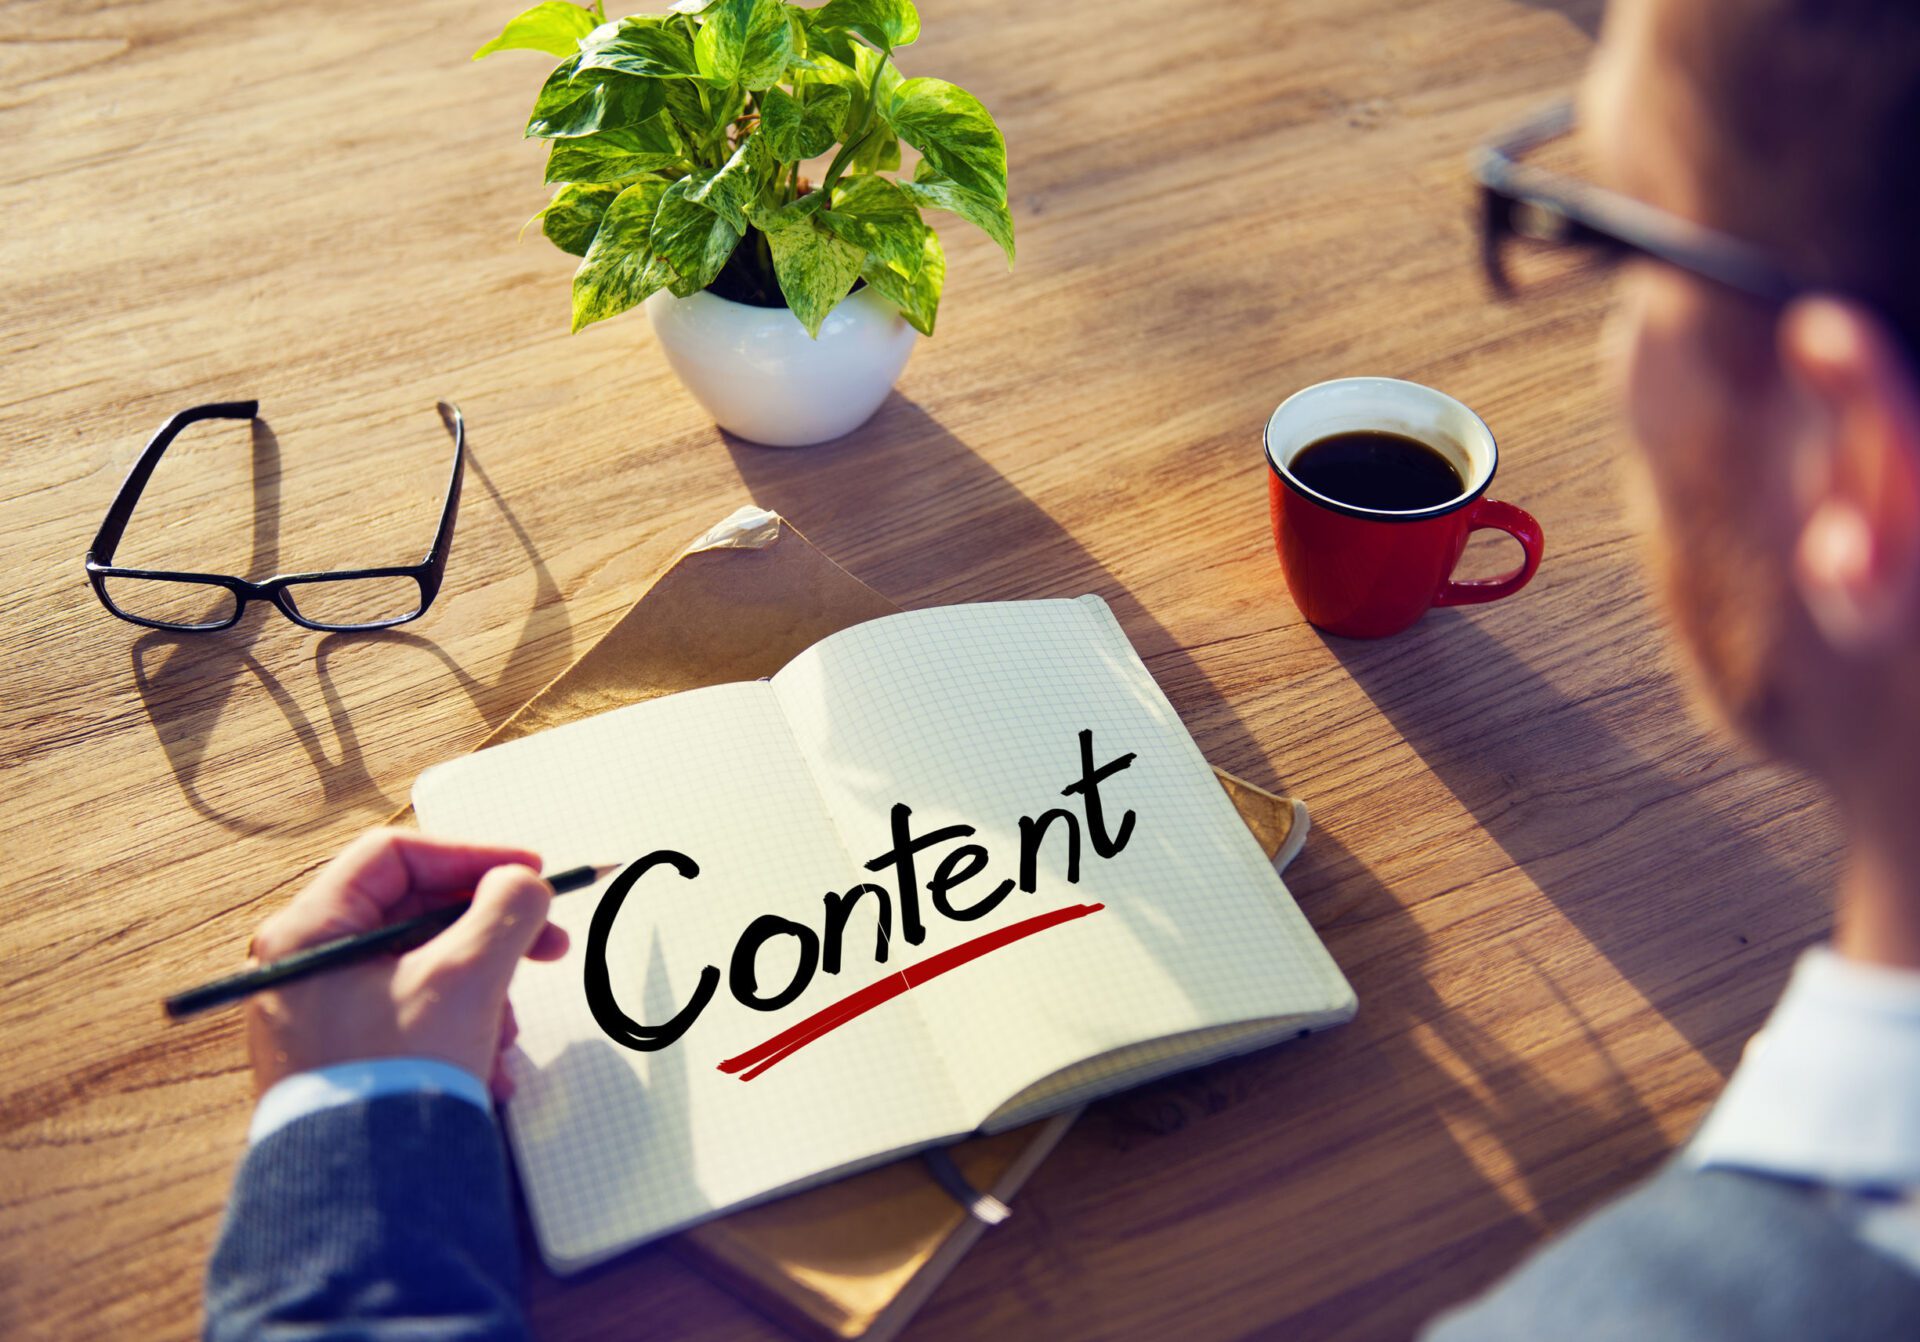 Content Creation Strategy